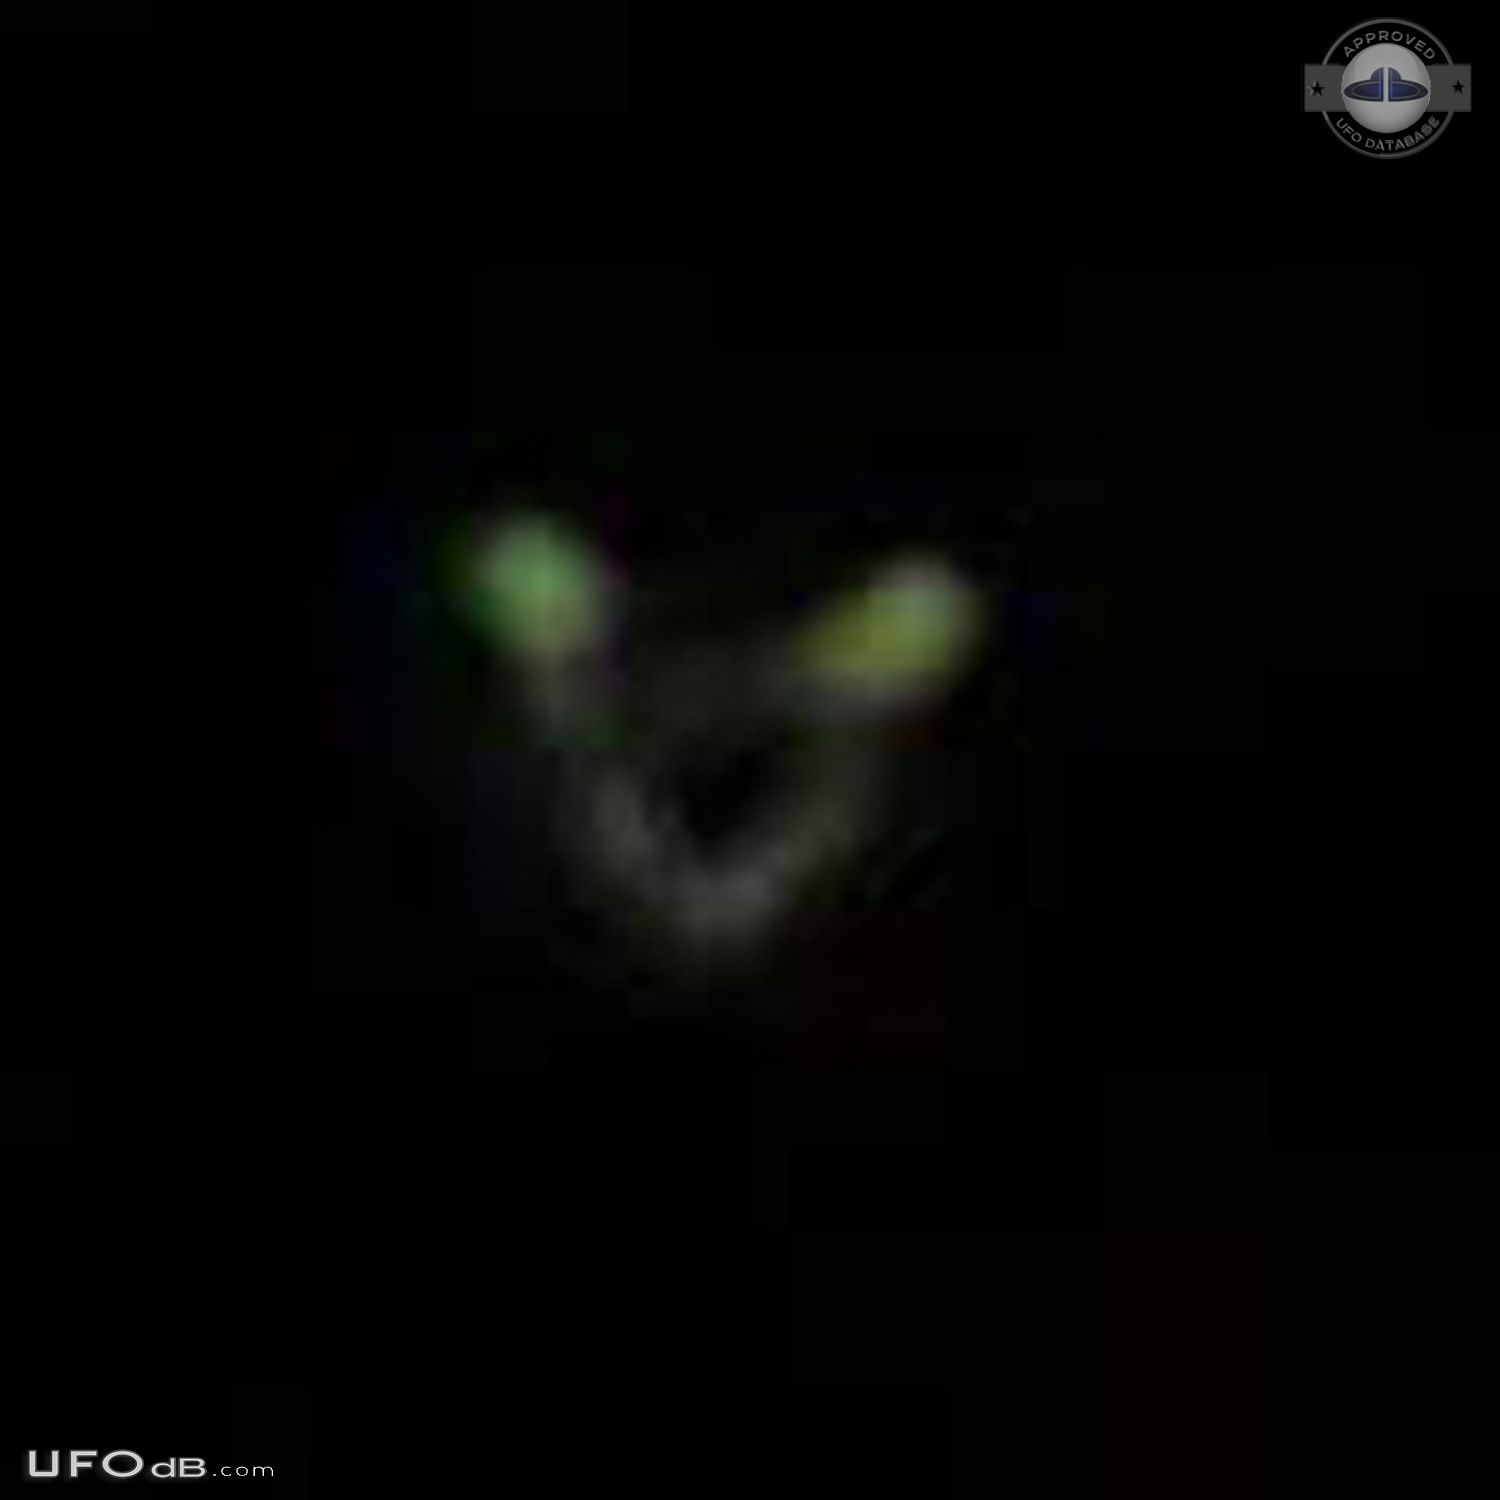 Circular UFO with 2 glowing green lights seen in Huddersfield UK 2011 UFO Picture #688-3